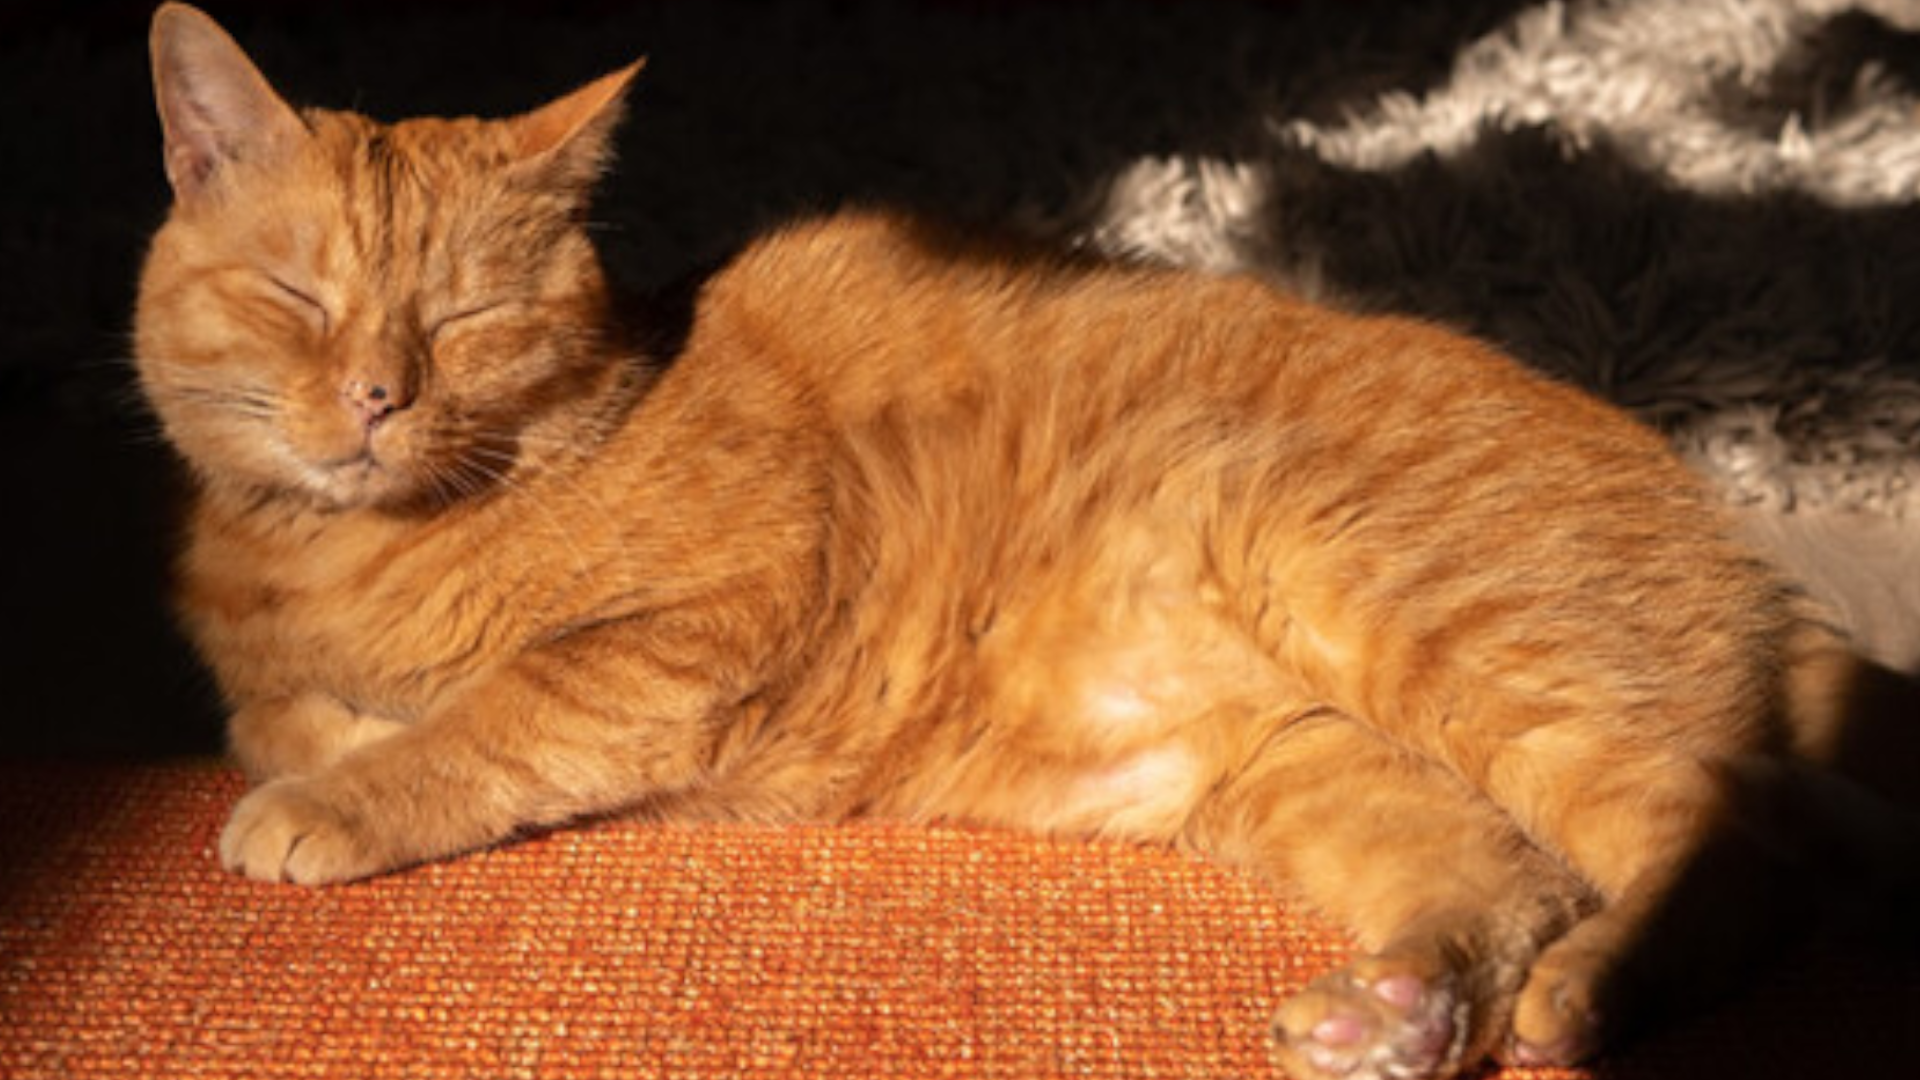 Orange tabby Murtaugh dozing in the sun who is the cat from Stray is partially based on